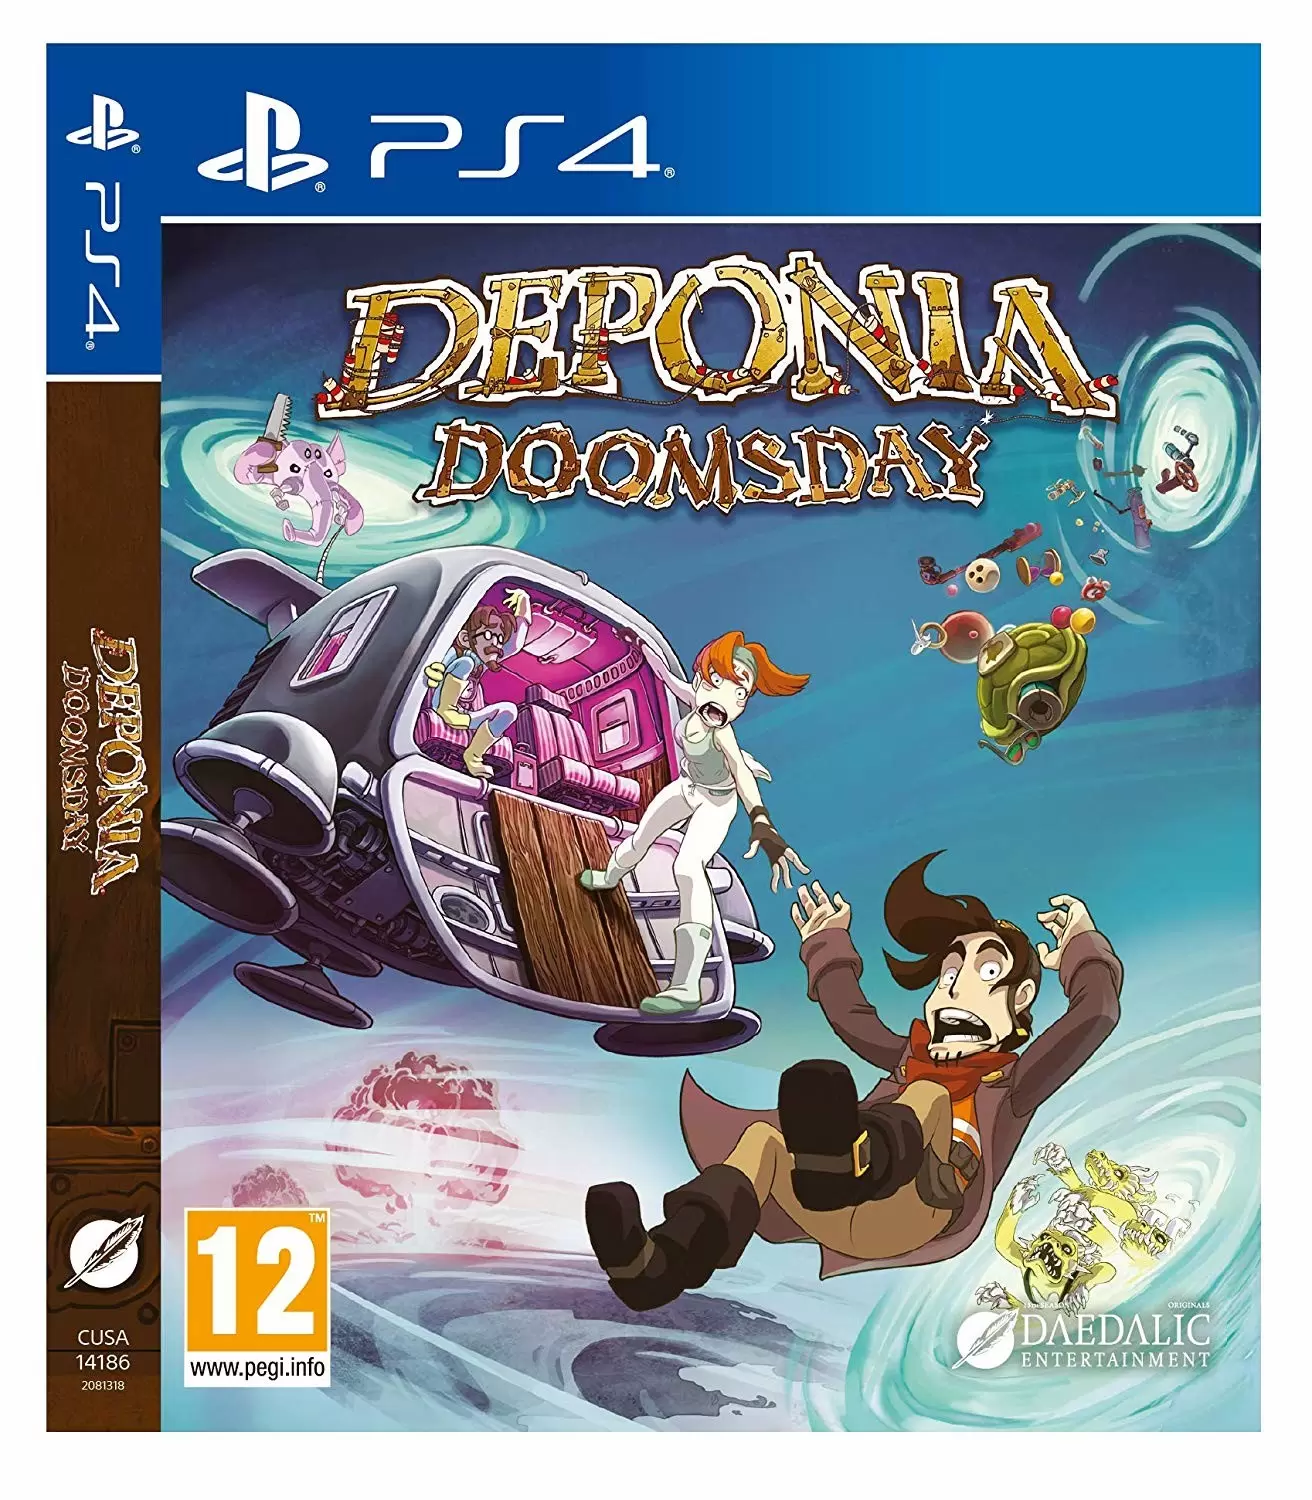 PS4 Games - Deponia Doomsday